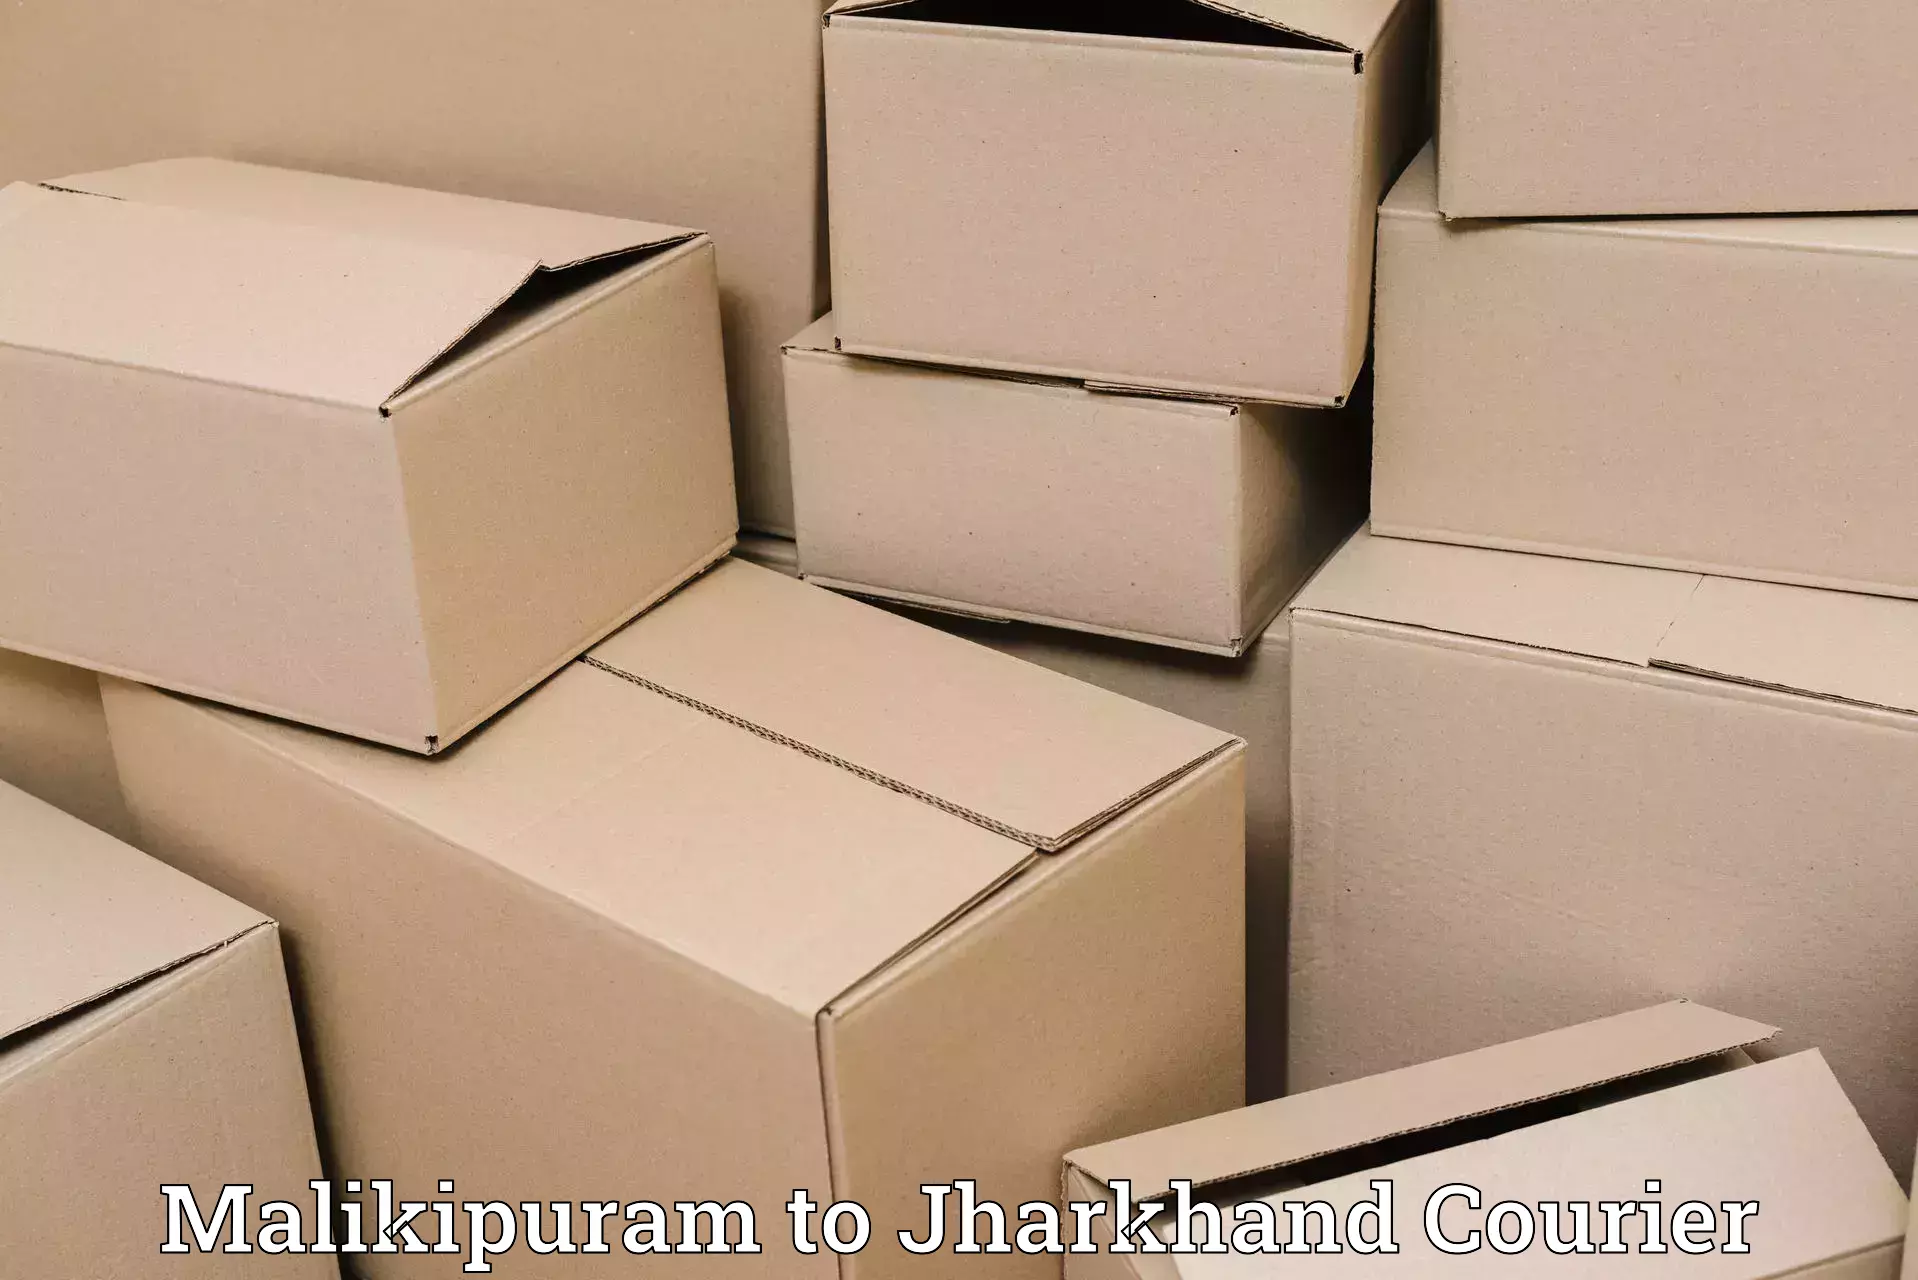 Reliable courier services Malikipuram to Ranchi